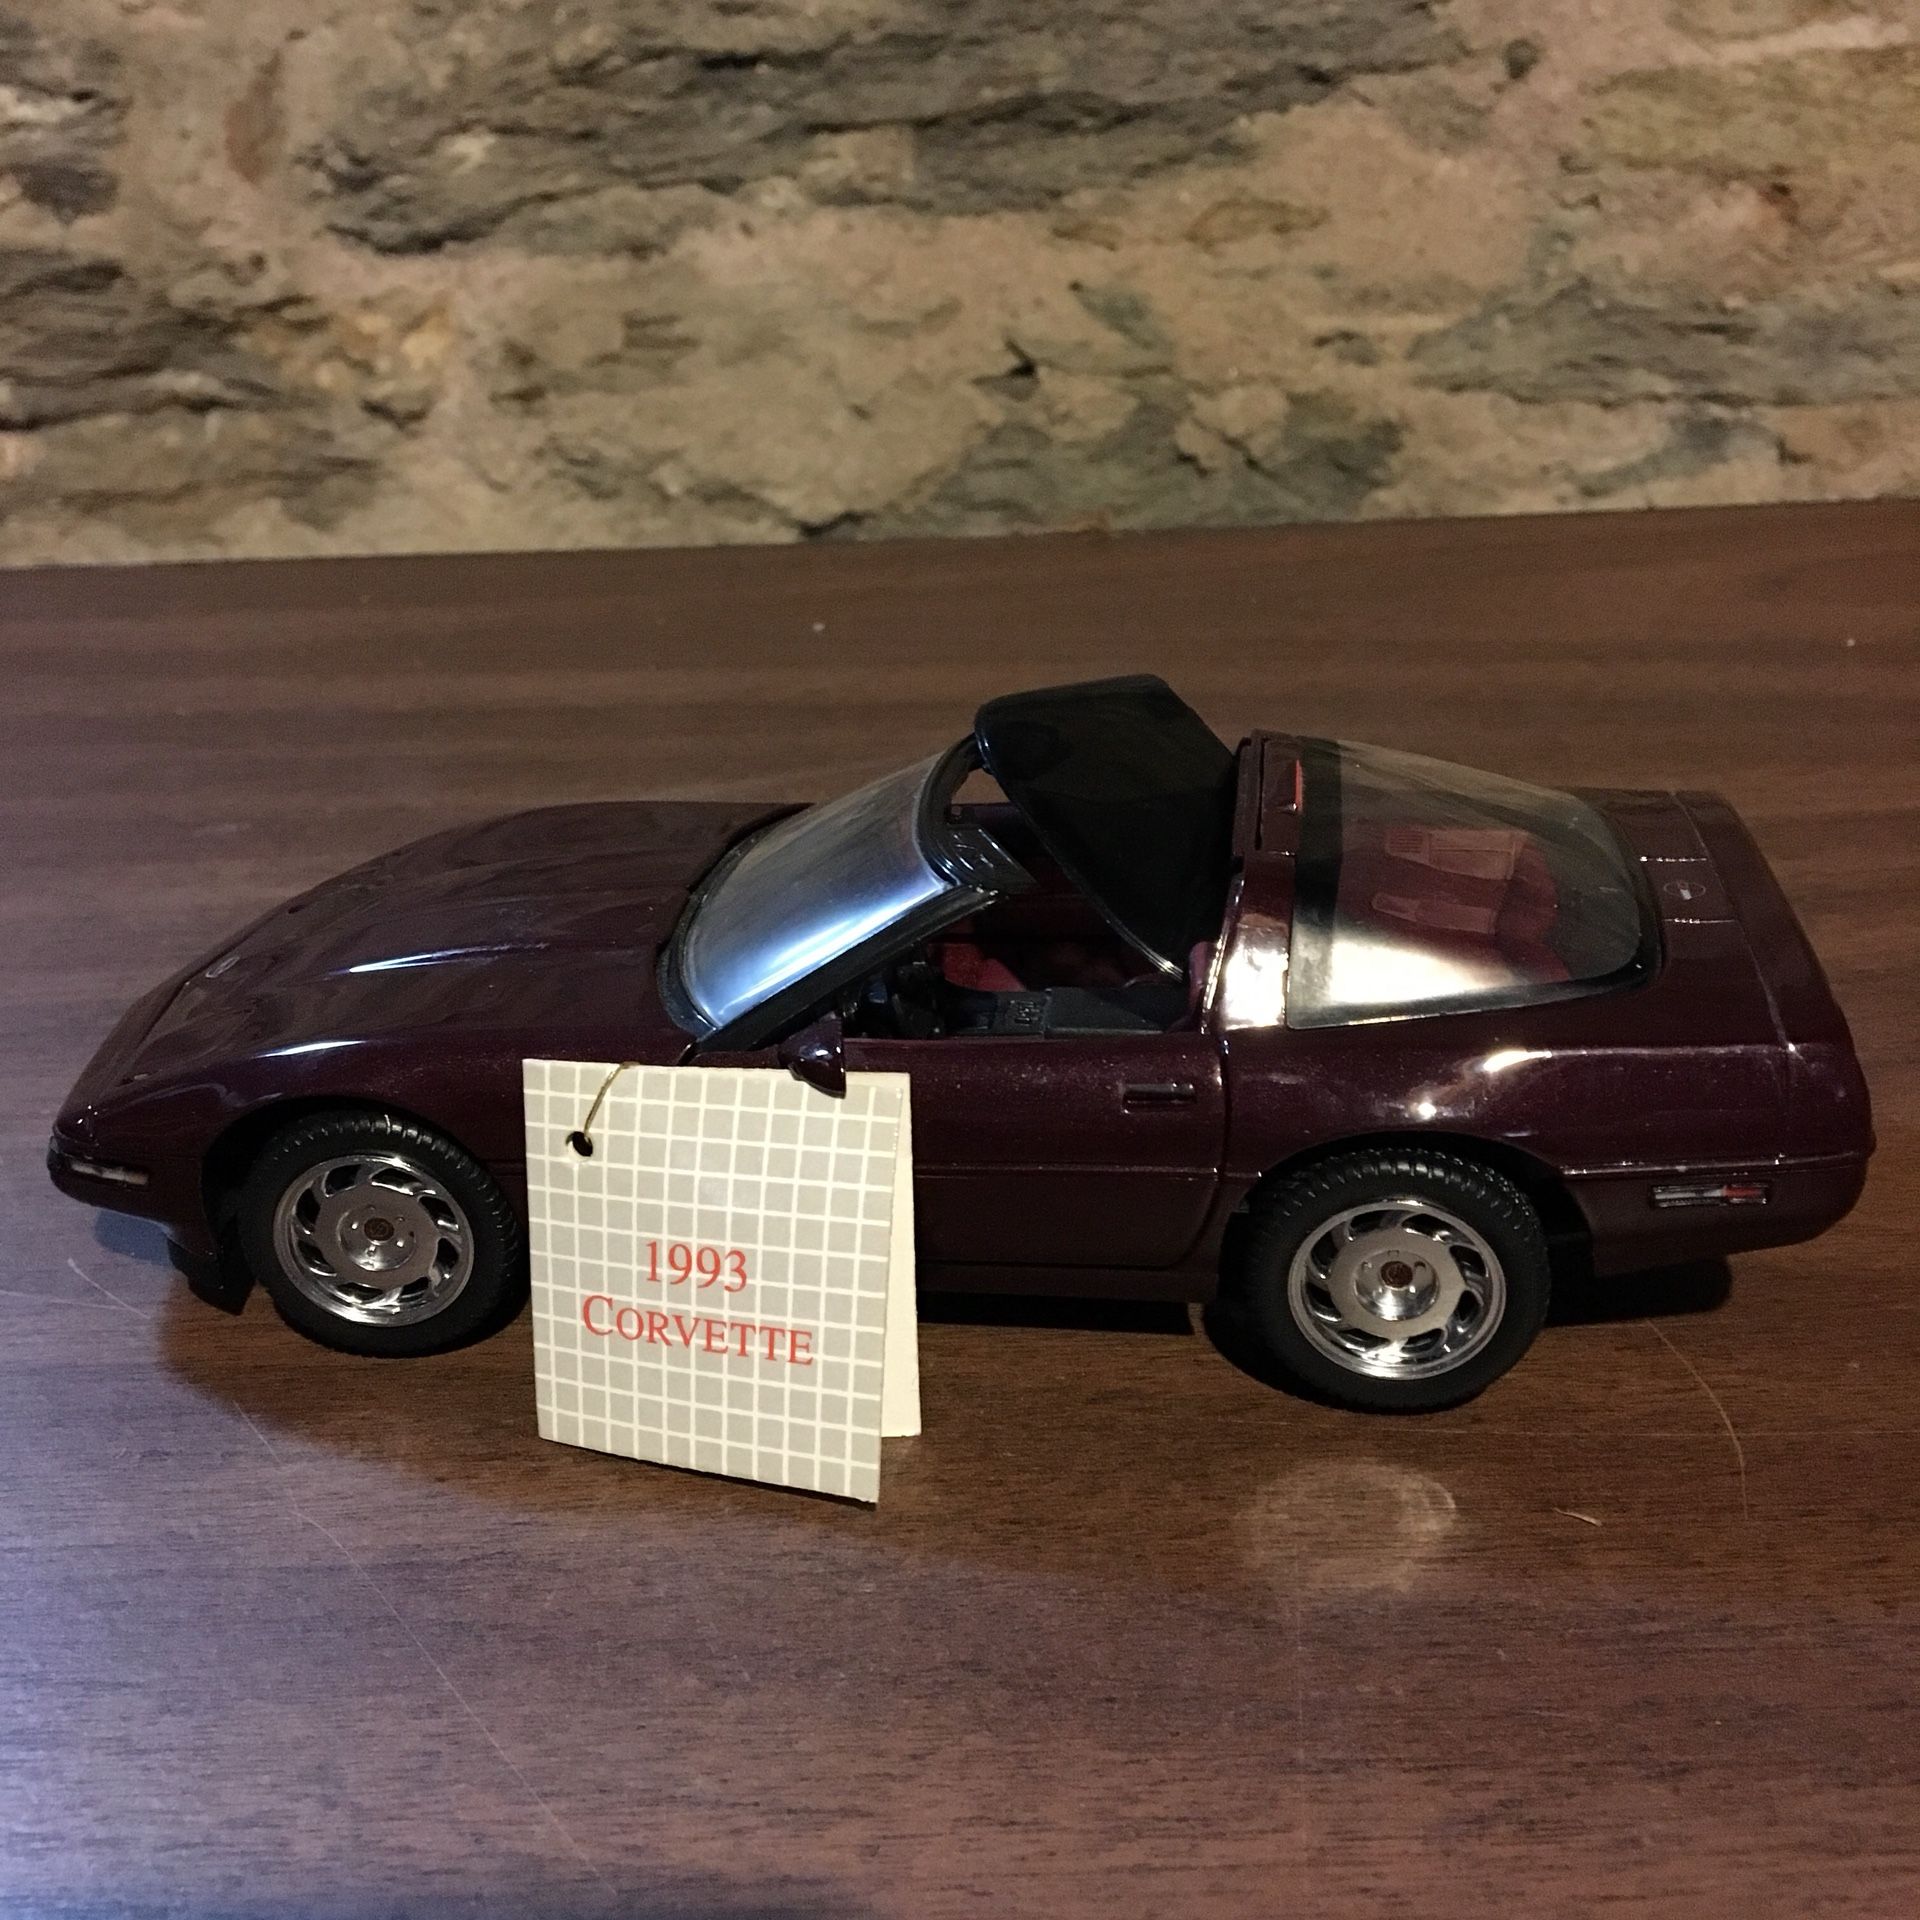 1993 Corvette Toy Model Collection